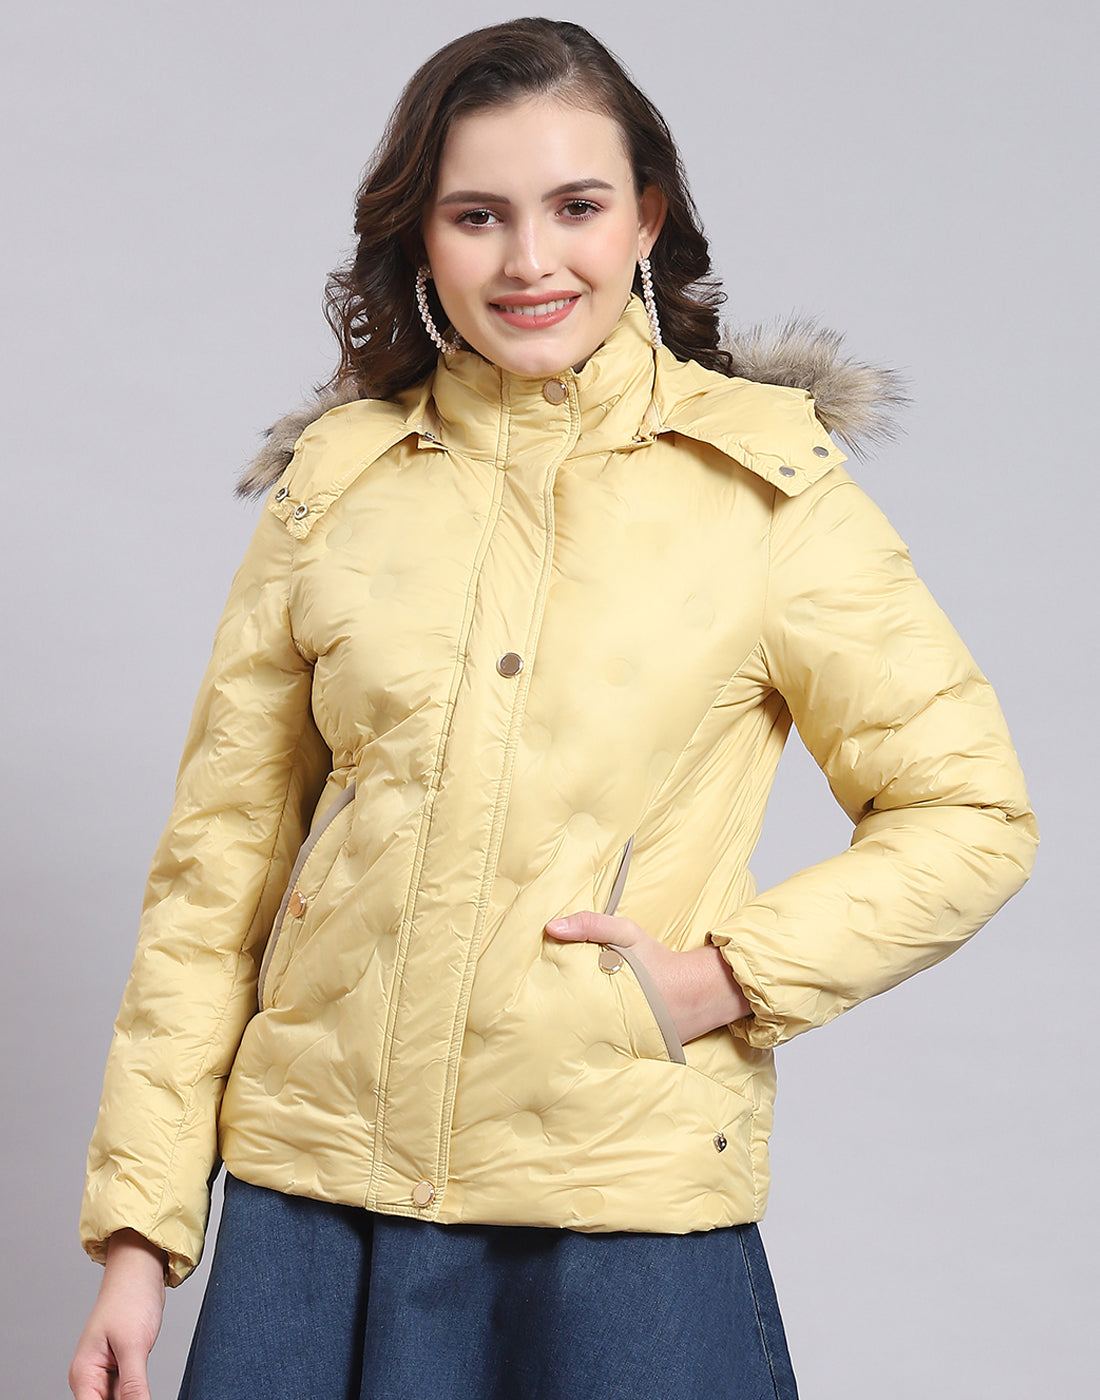 Full Sleeve Casual Jackets Ladies Fancy Plain Jacket at Rs 950 in Ludhiana